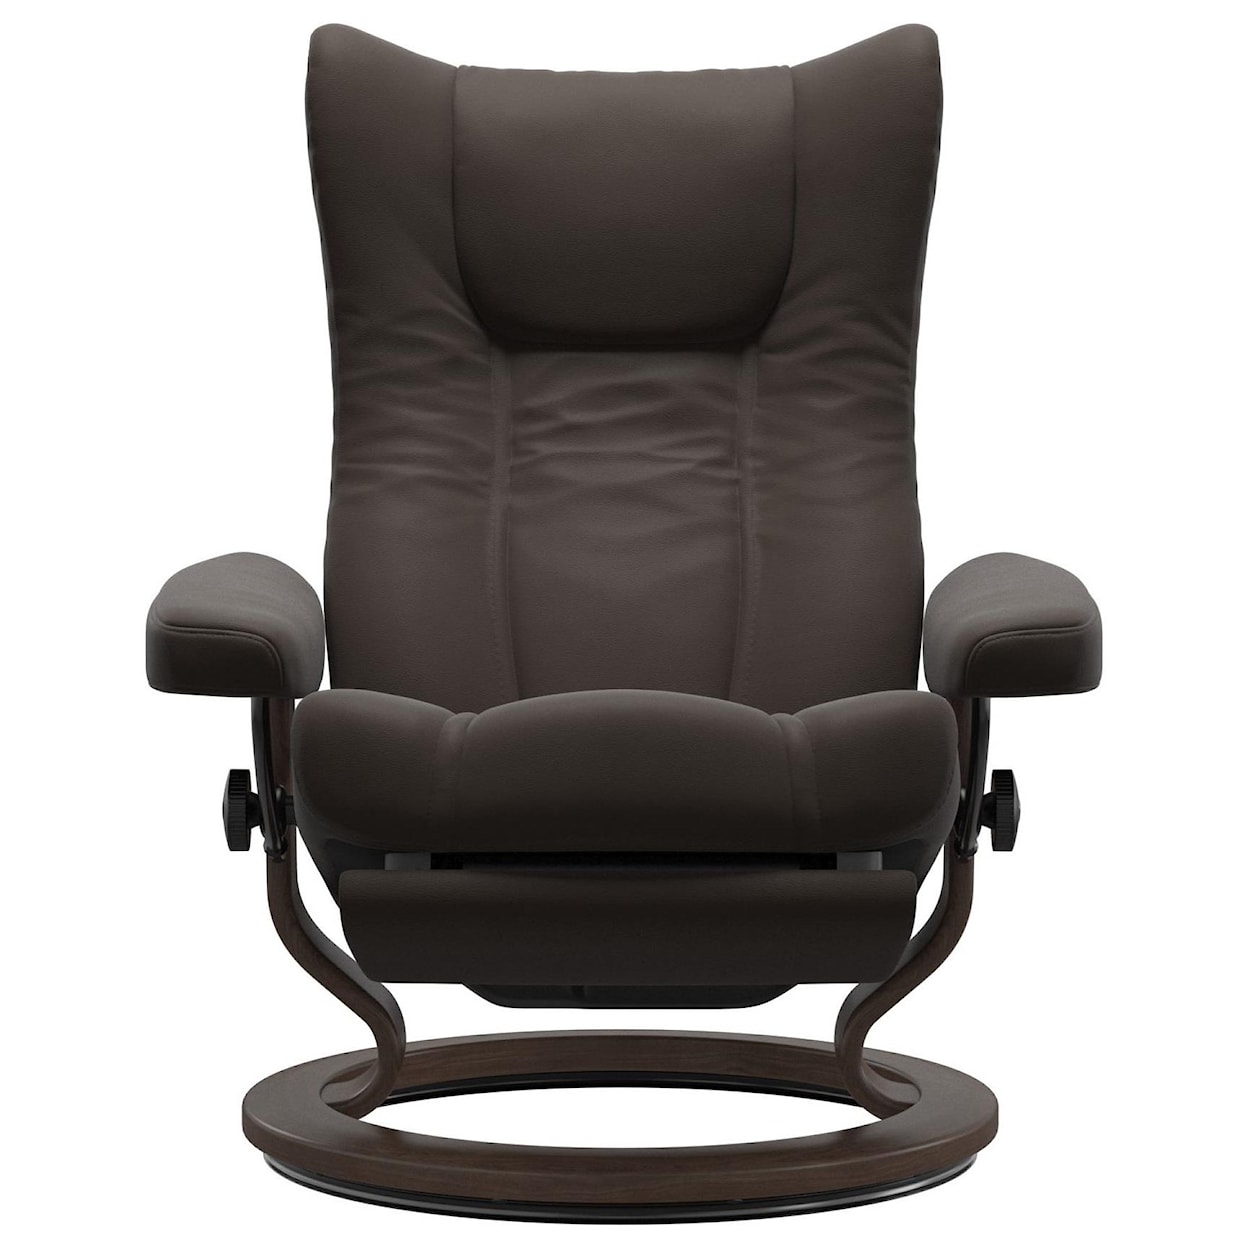 Stressless Wing Large Classic Power Recliner